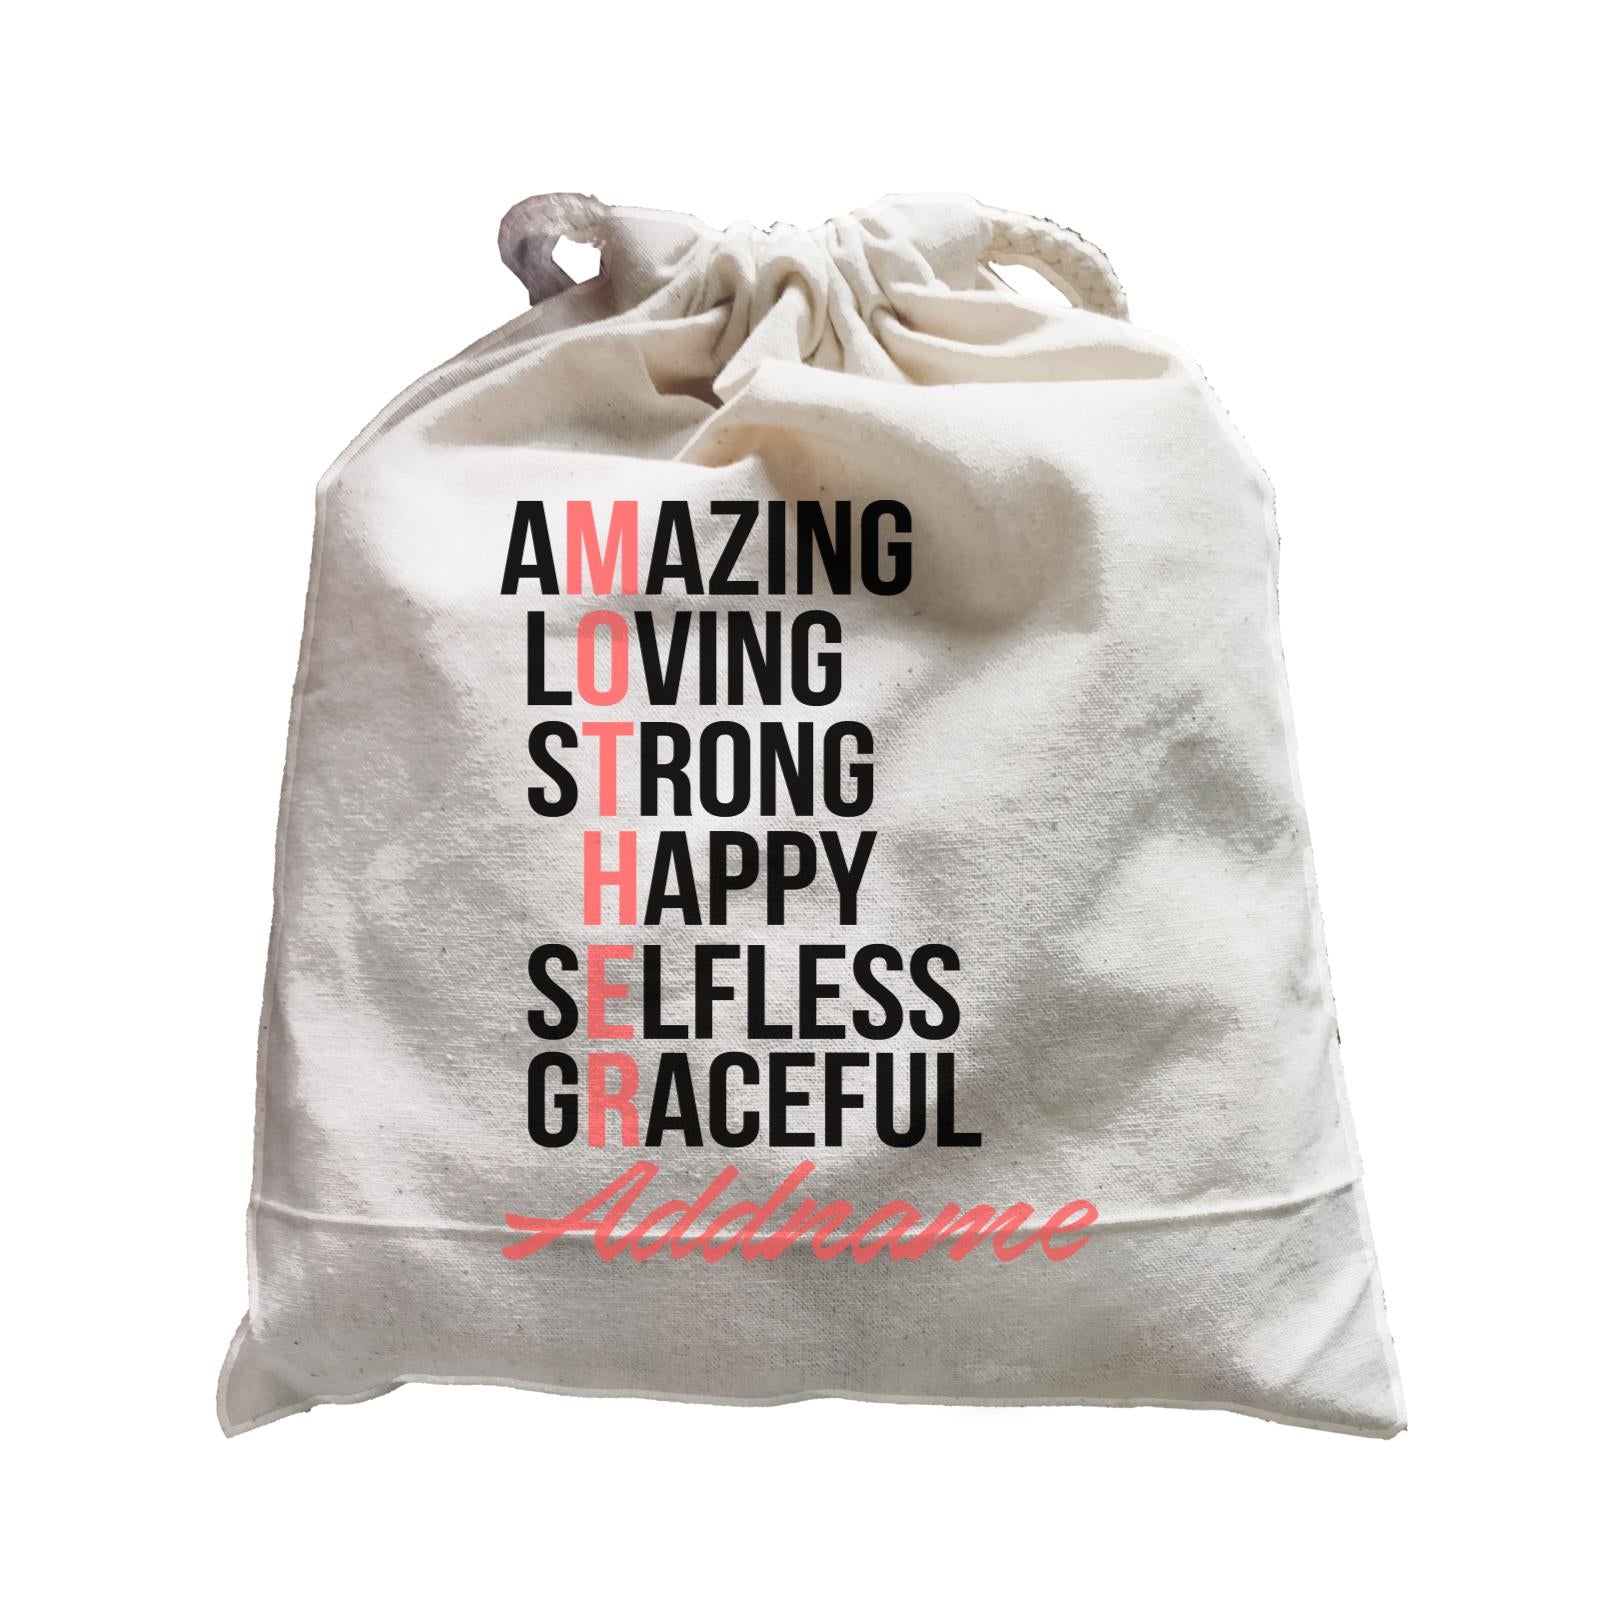 Amazing Loving Strong Happy Selfless Graceful Mother Personalizable with Name Satchel